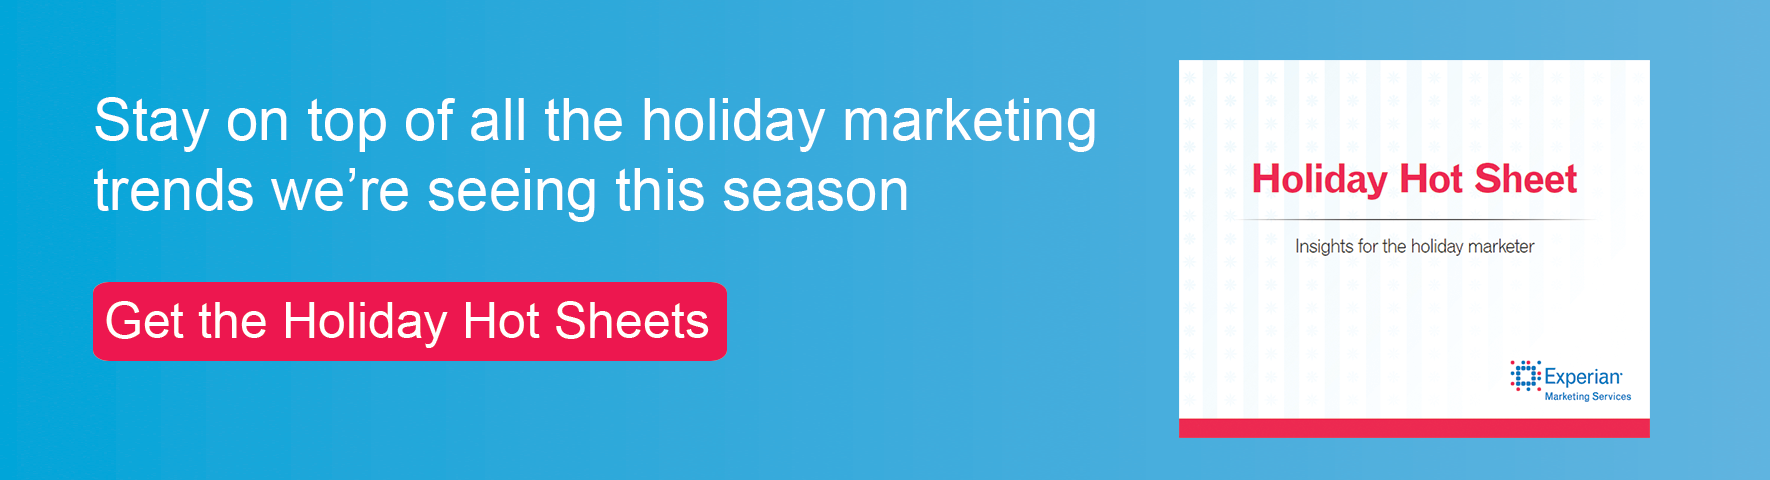 Get more holiday data from our Holiday Hot Sheets